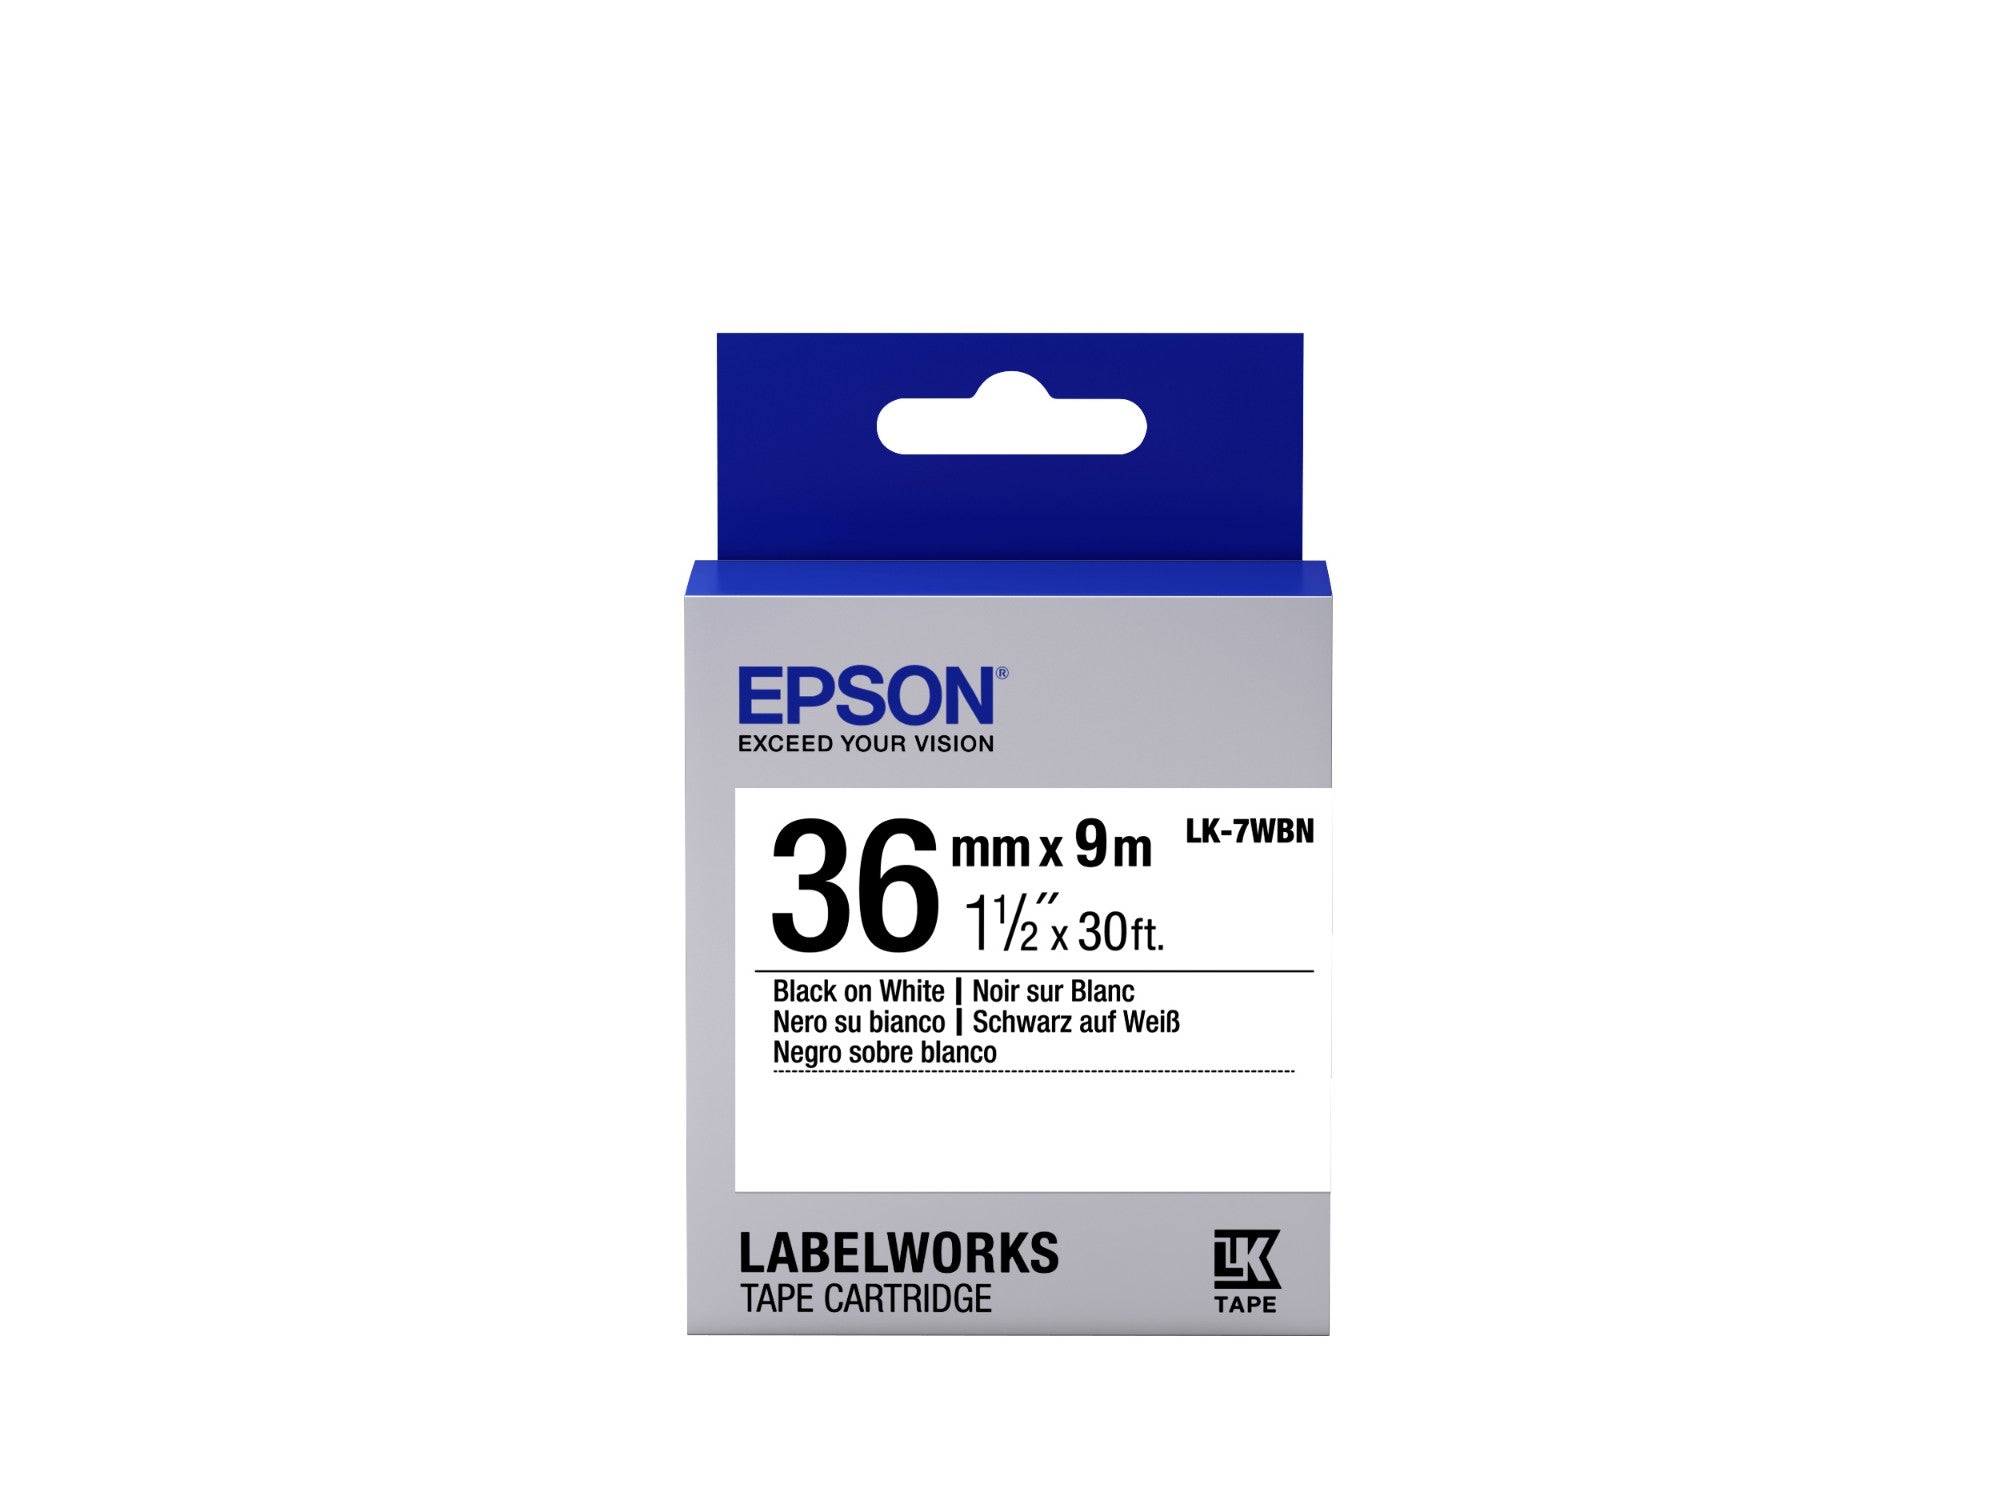 Epson C53S657006/LK-7WBN DirectLabel-etikettes black on white 36mm x 9m for Epson LabelWorks 4-36mm